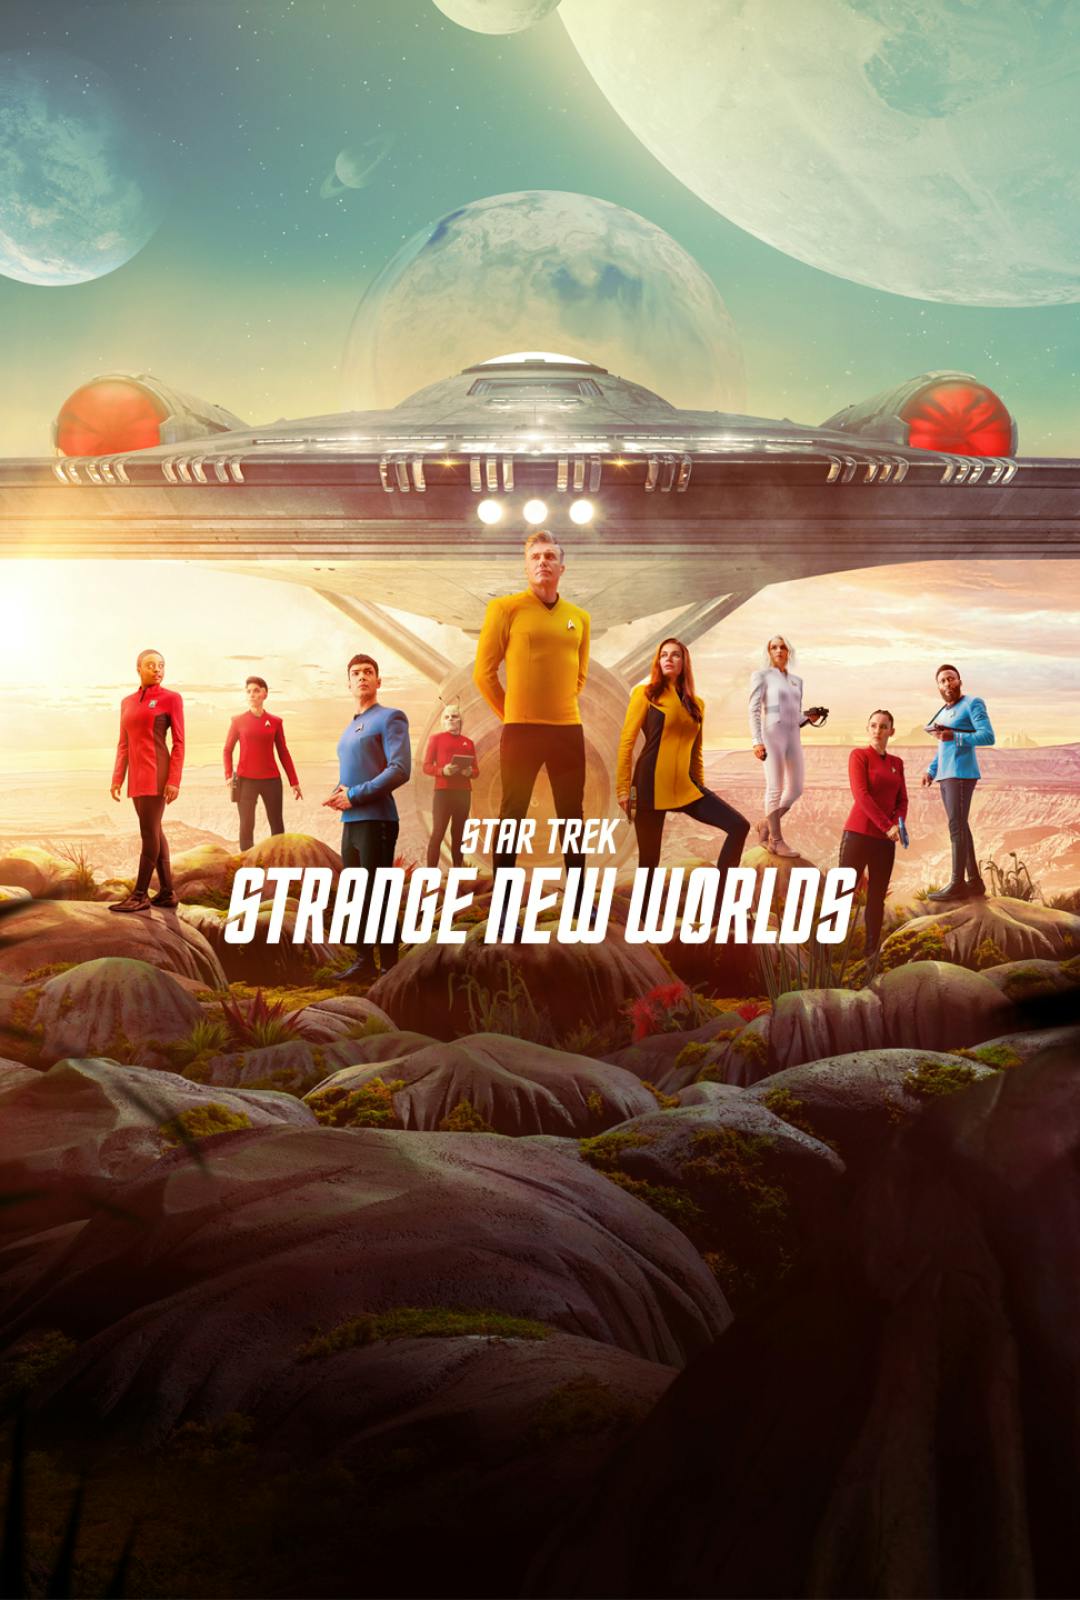 Key Art for Star Trek: Strange New Worlds Season 1 showing Captain Pike and the crew on the surface of a Strange New World with the U.S.S. Enterprise behind them and several moons and planets in the sky. 